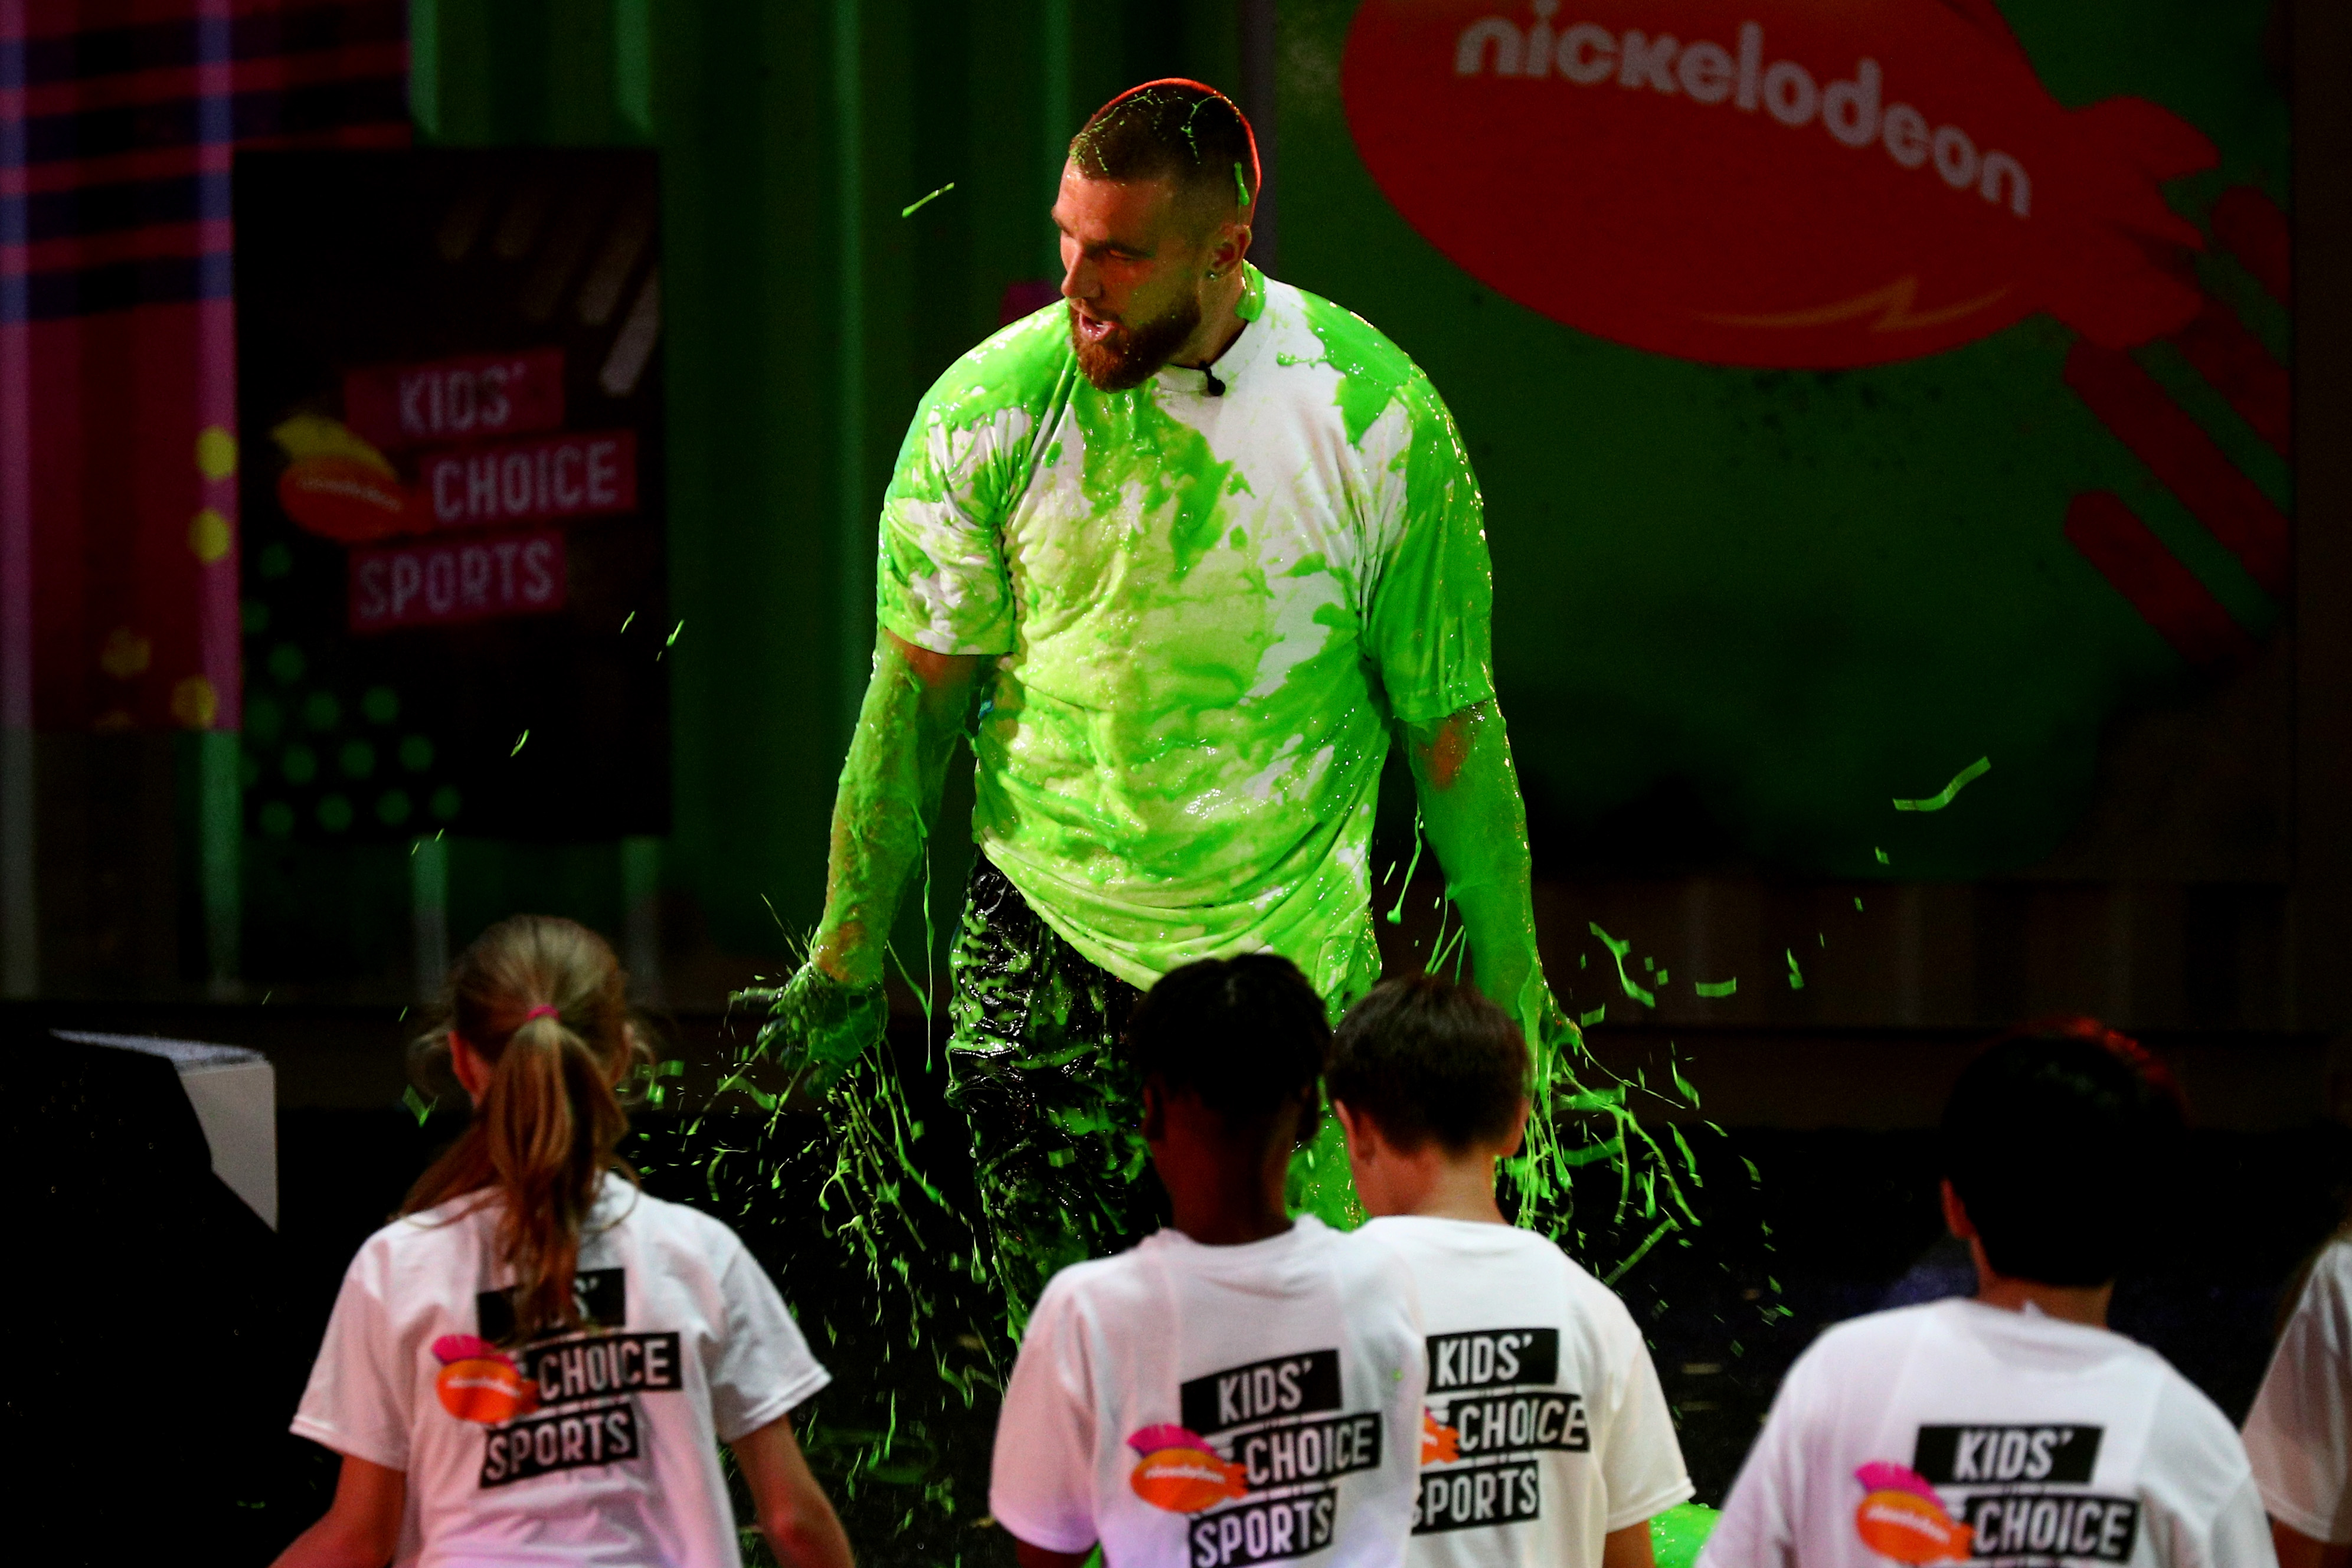 NFL player Travis Kelce reacts after being "slimed" onstage during the Nickelodeon Kids' Choice Sports 2018